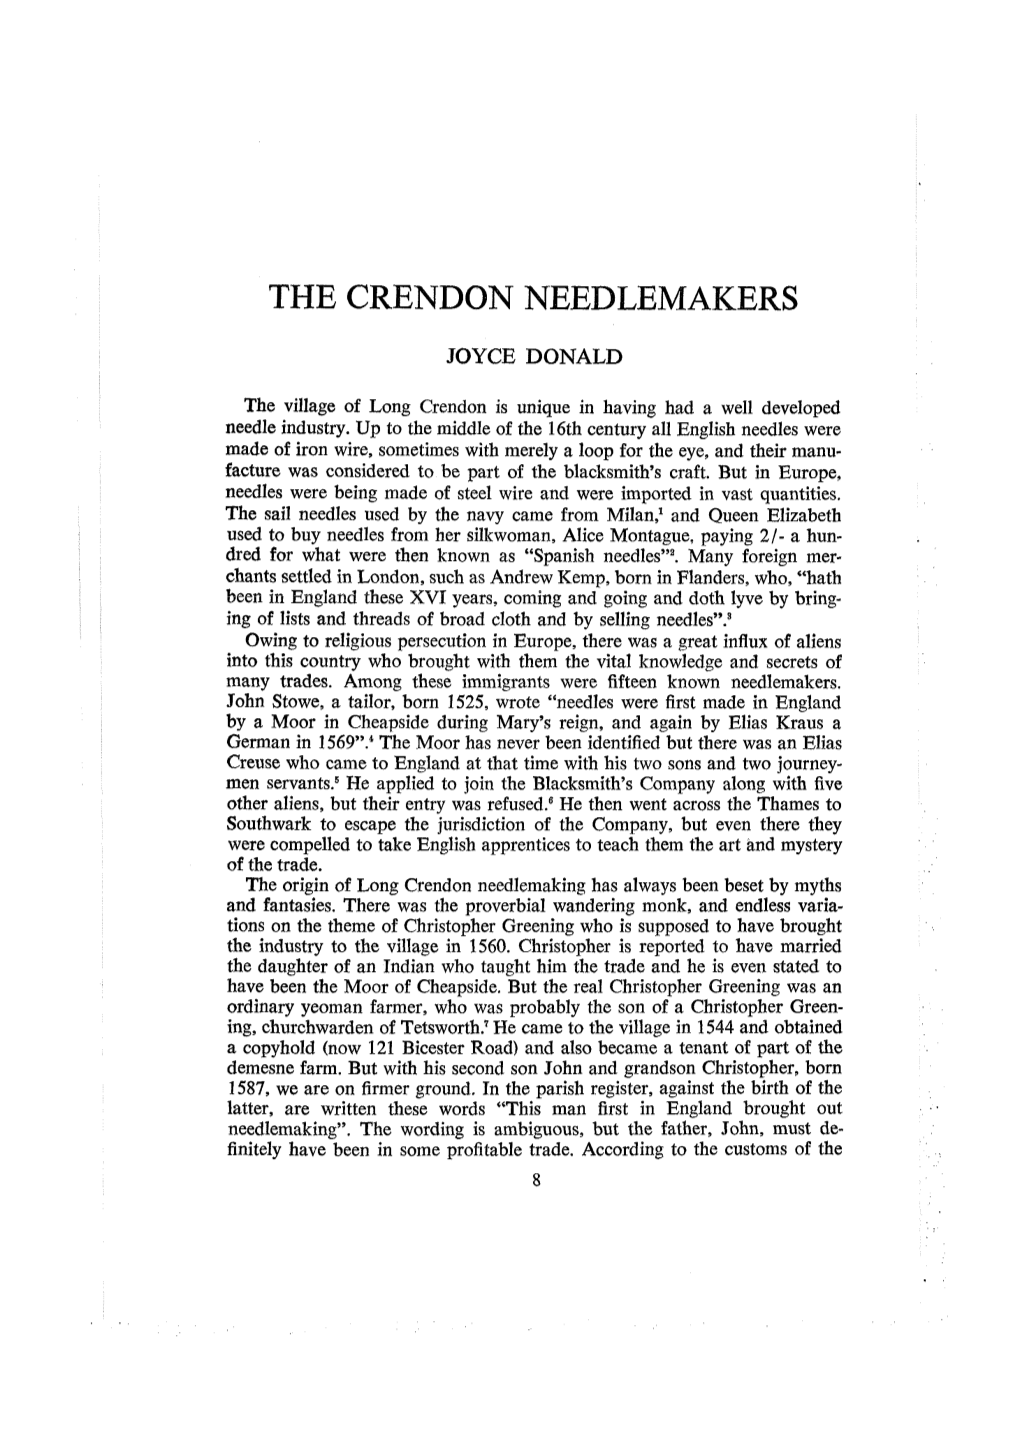 THE CRENDON NEEDLEMAKERS JOYCE DONALD the Village of Long Crendon Is Unique in Having Had a Well Developed Needle Industry